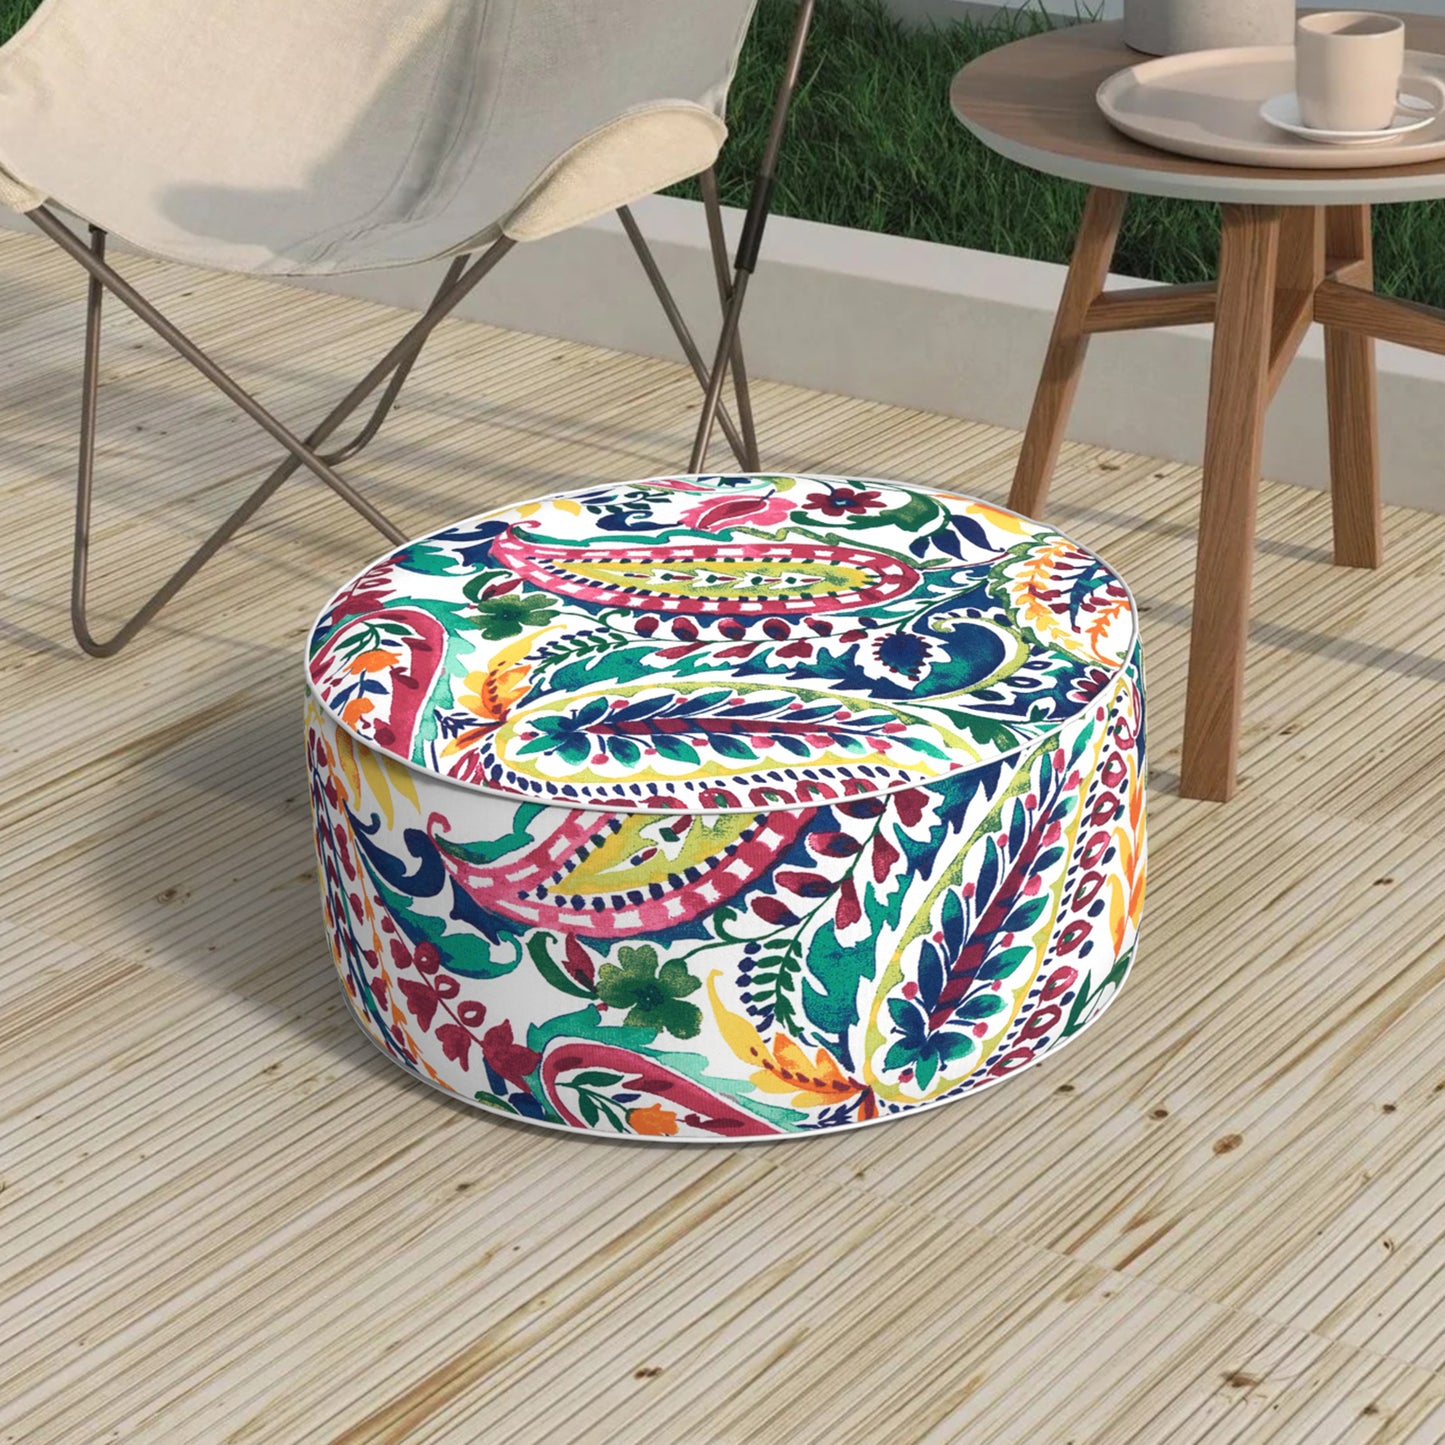 Melody Elephant Patio Inflatable Ottoman, 21x9 Inch Portable Stool Ottoman with Handle, Outdoor Round Footrest Stool for Garden Camping, Vigour Paisley